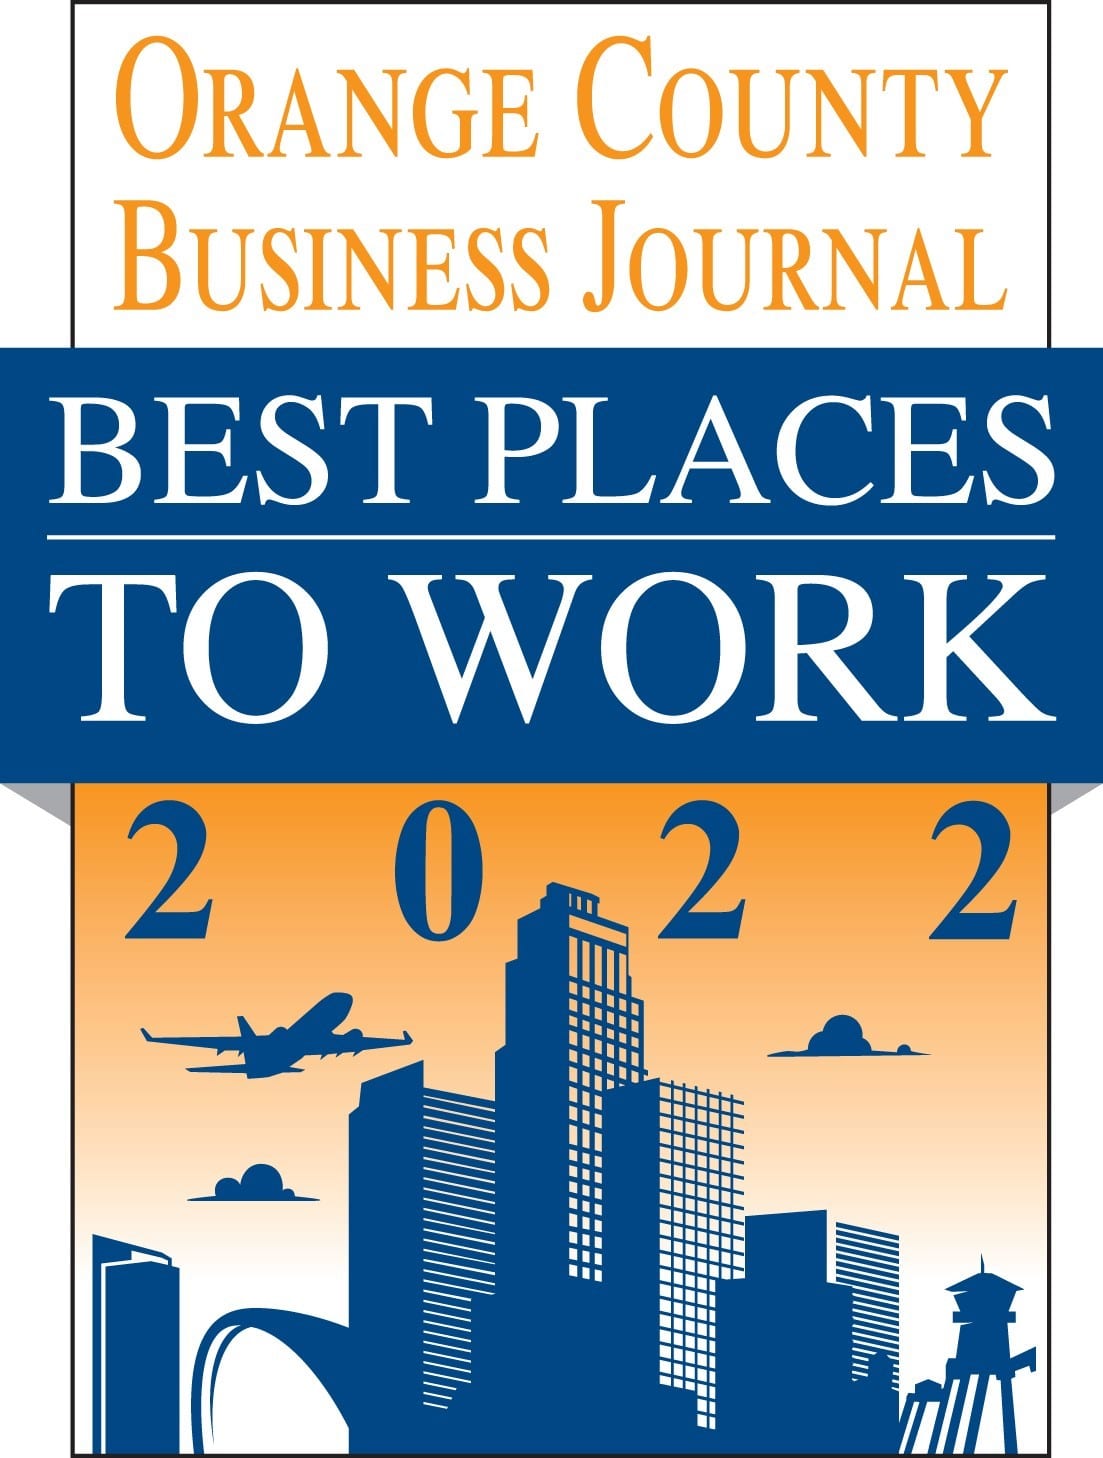 Technossus Voted One of OC’s Best Places to Work in 2022